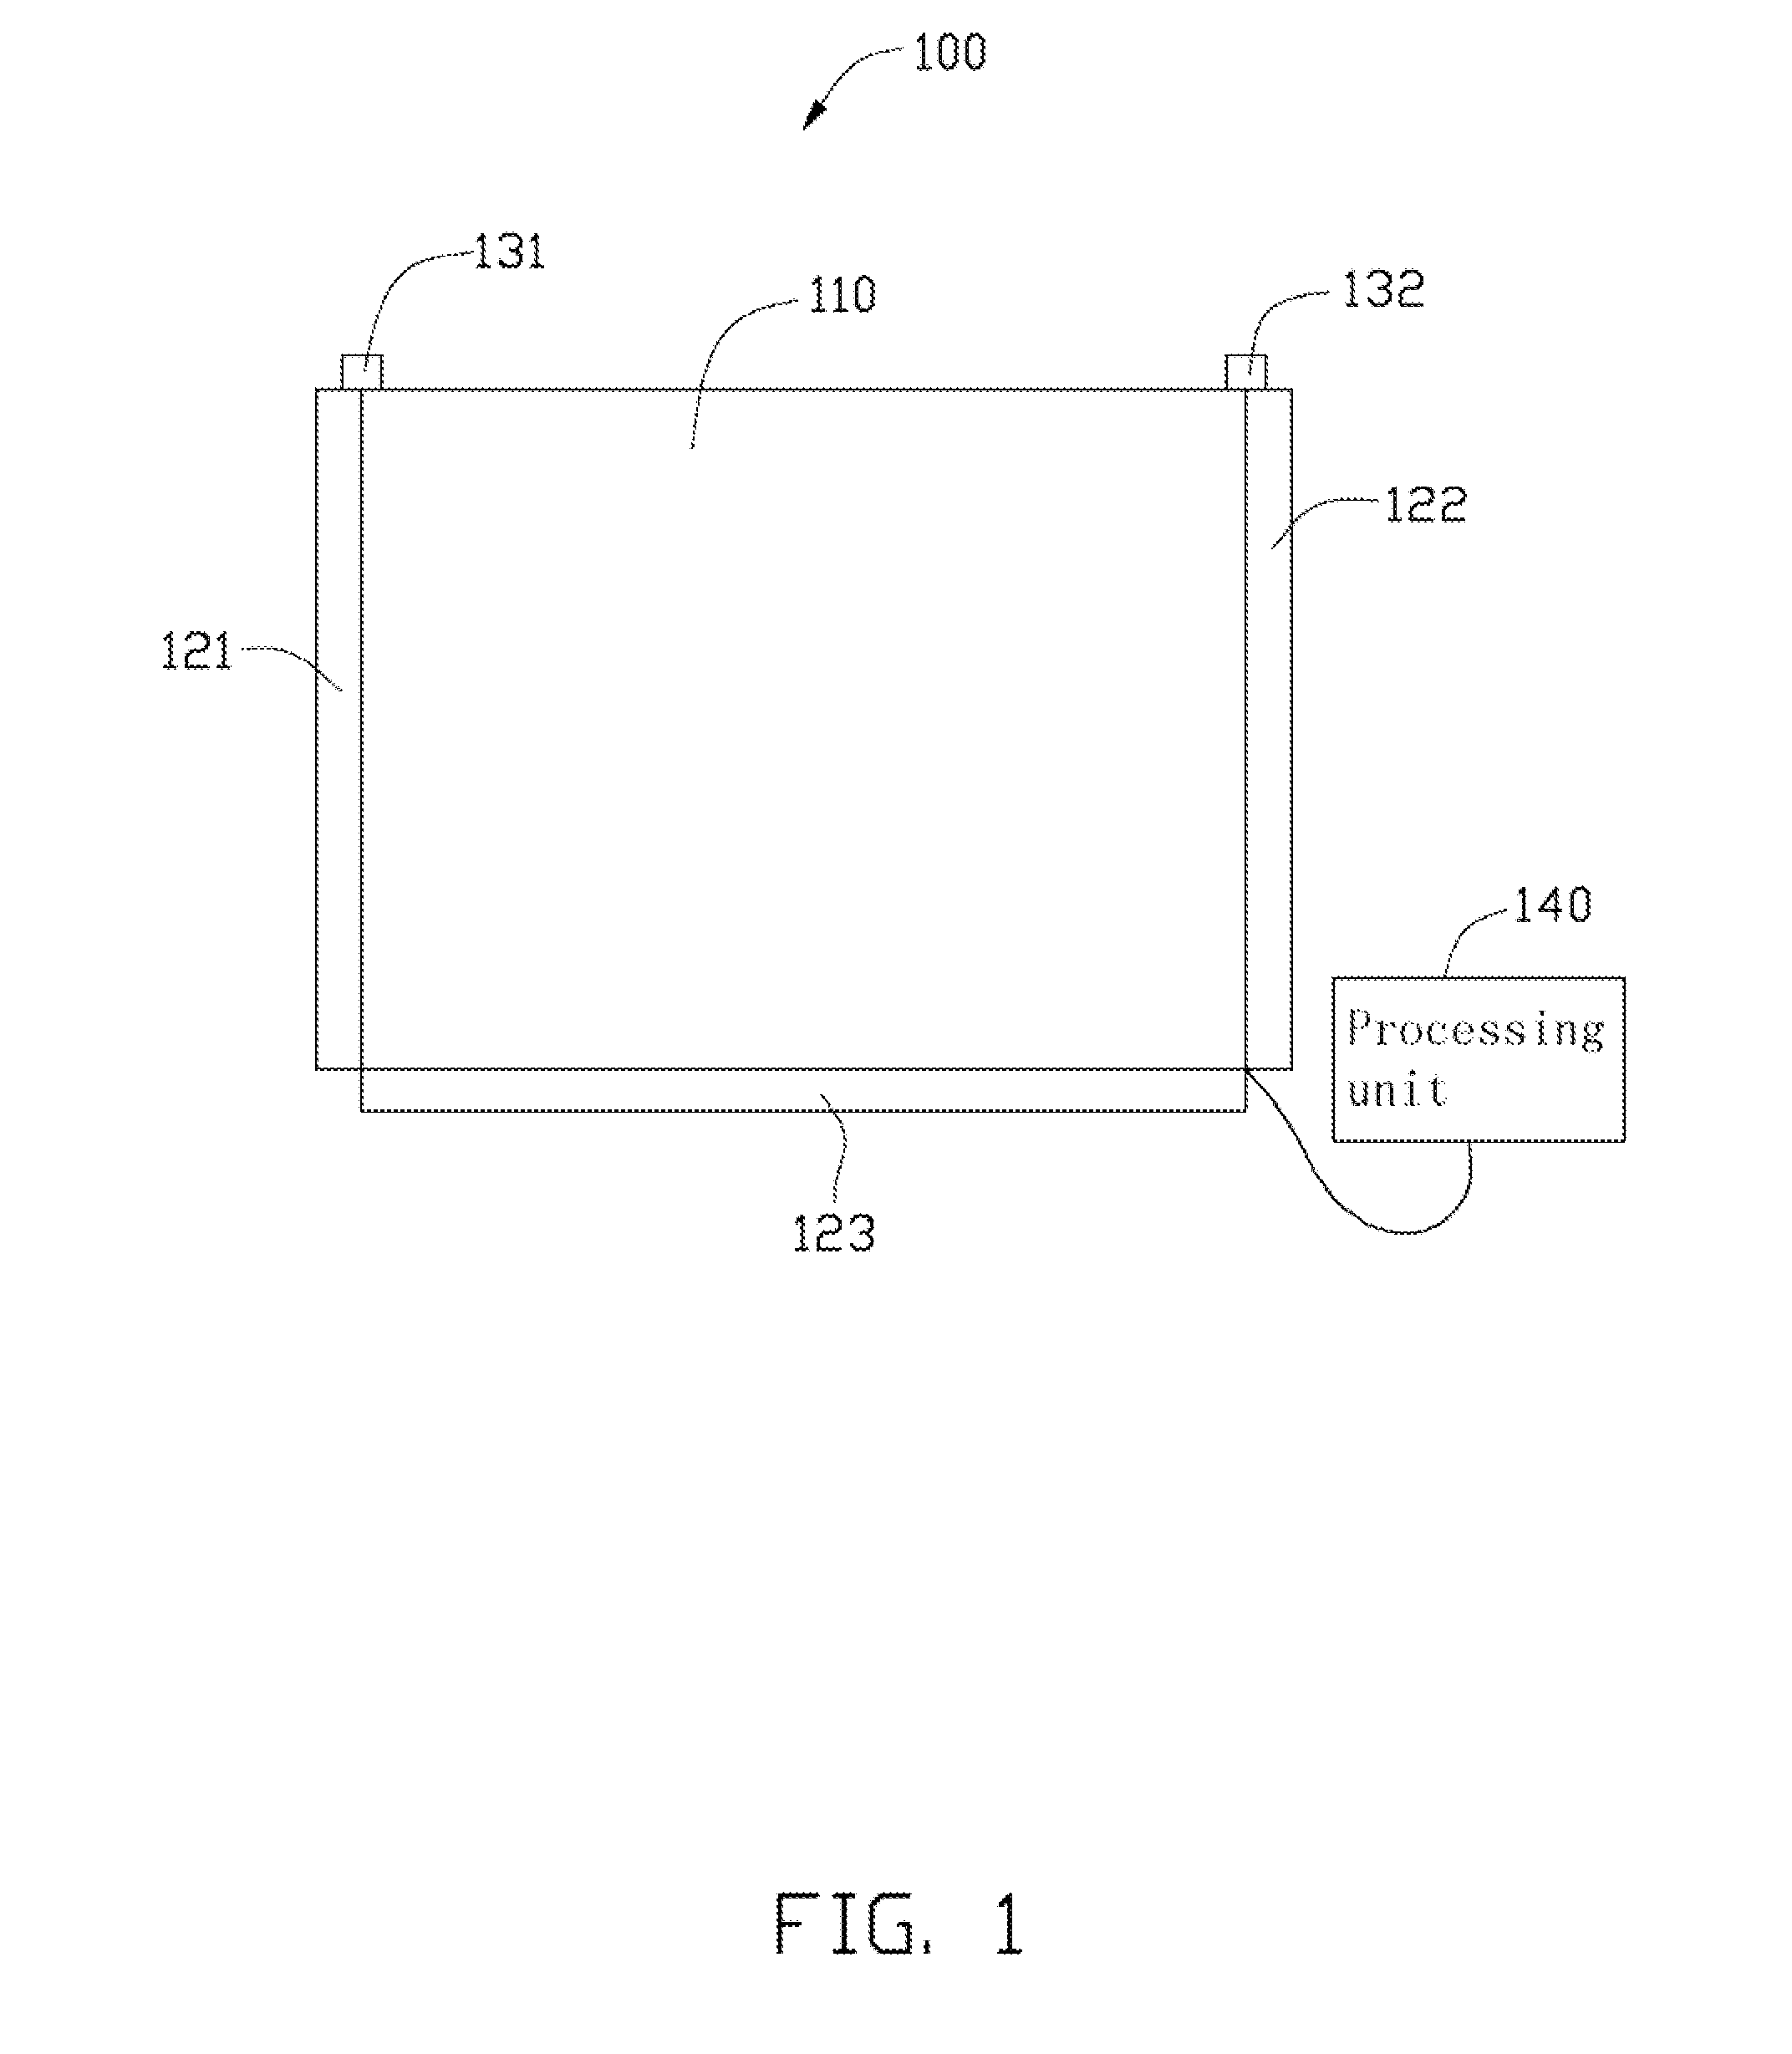 Optical touch screen device